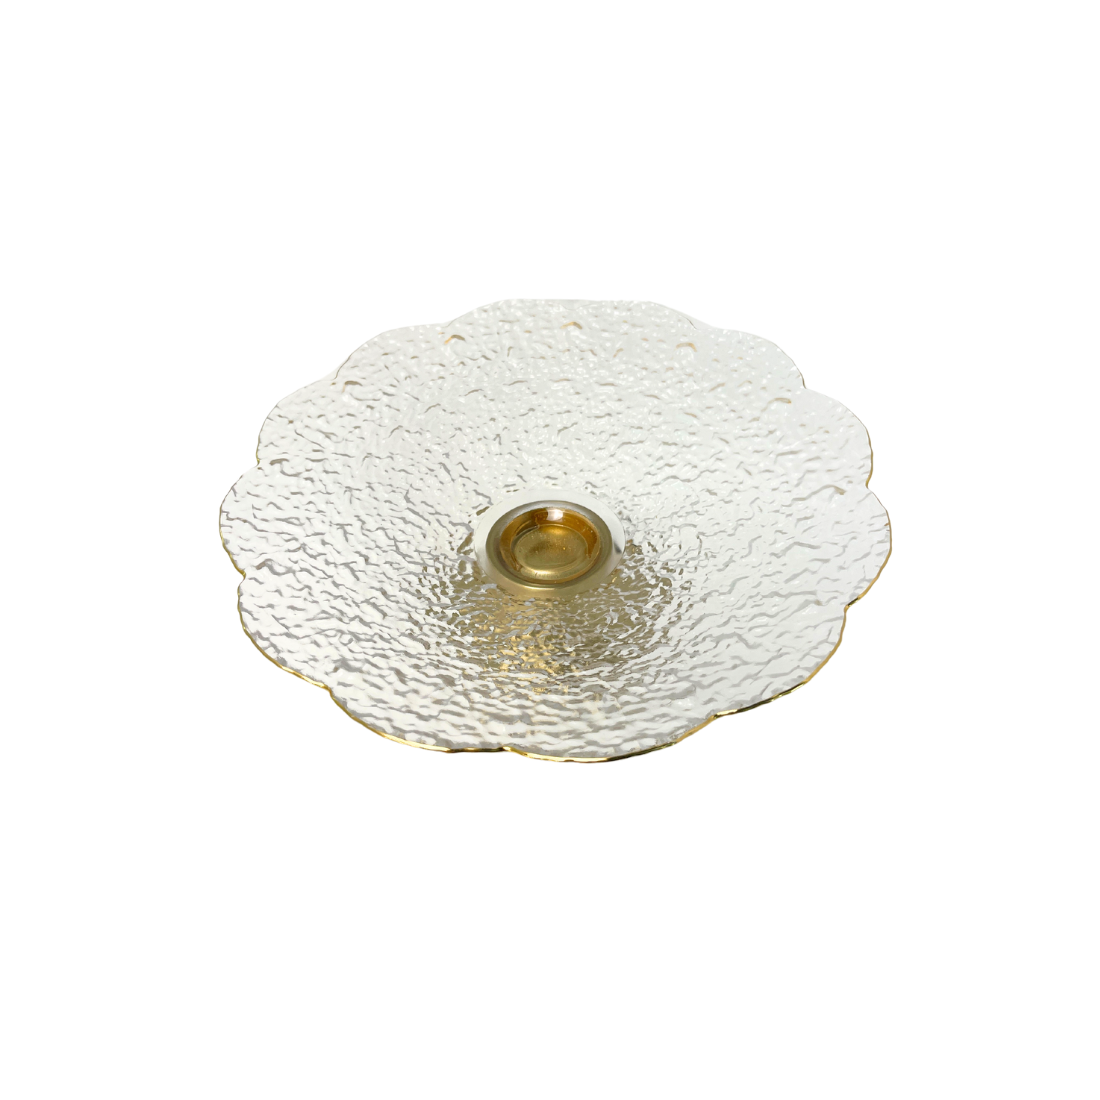 Glass Cake Stand with Gold Base